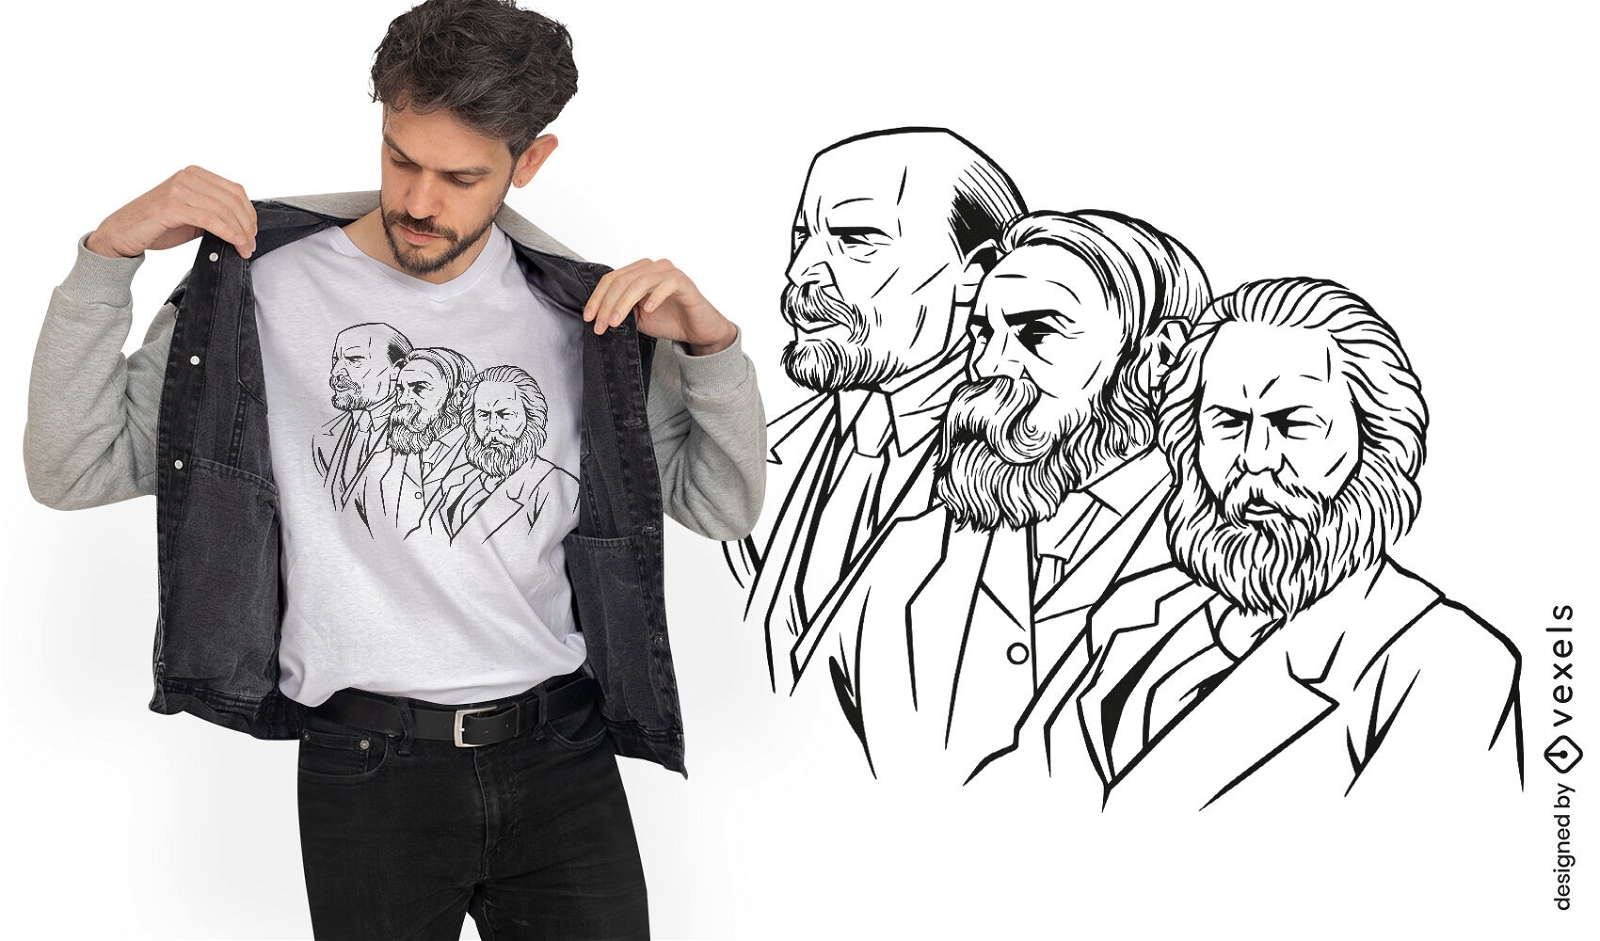 Three old men in suits t-shirt design